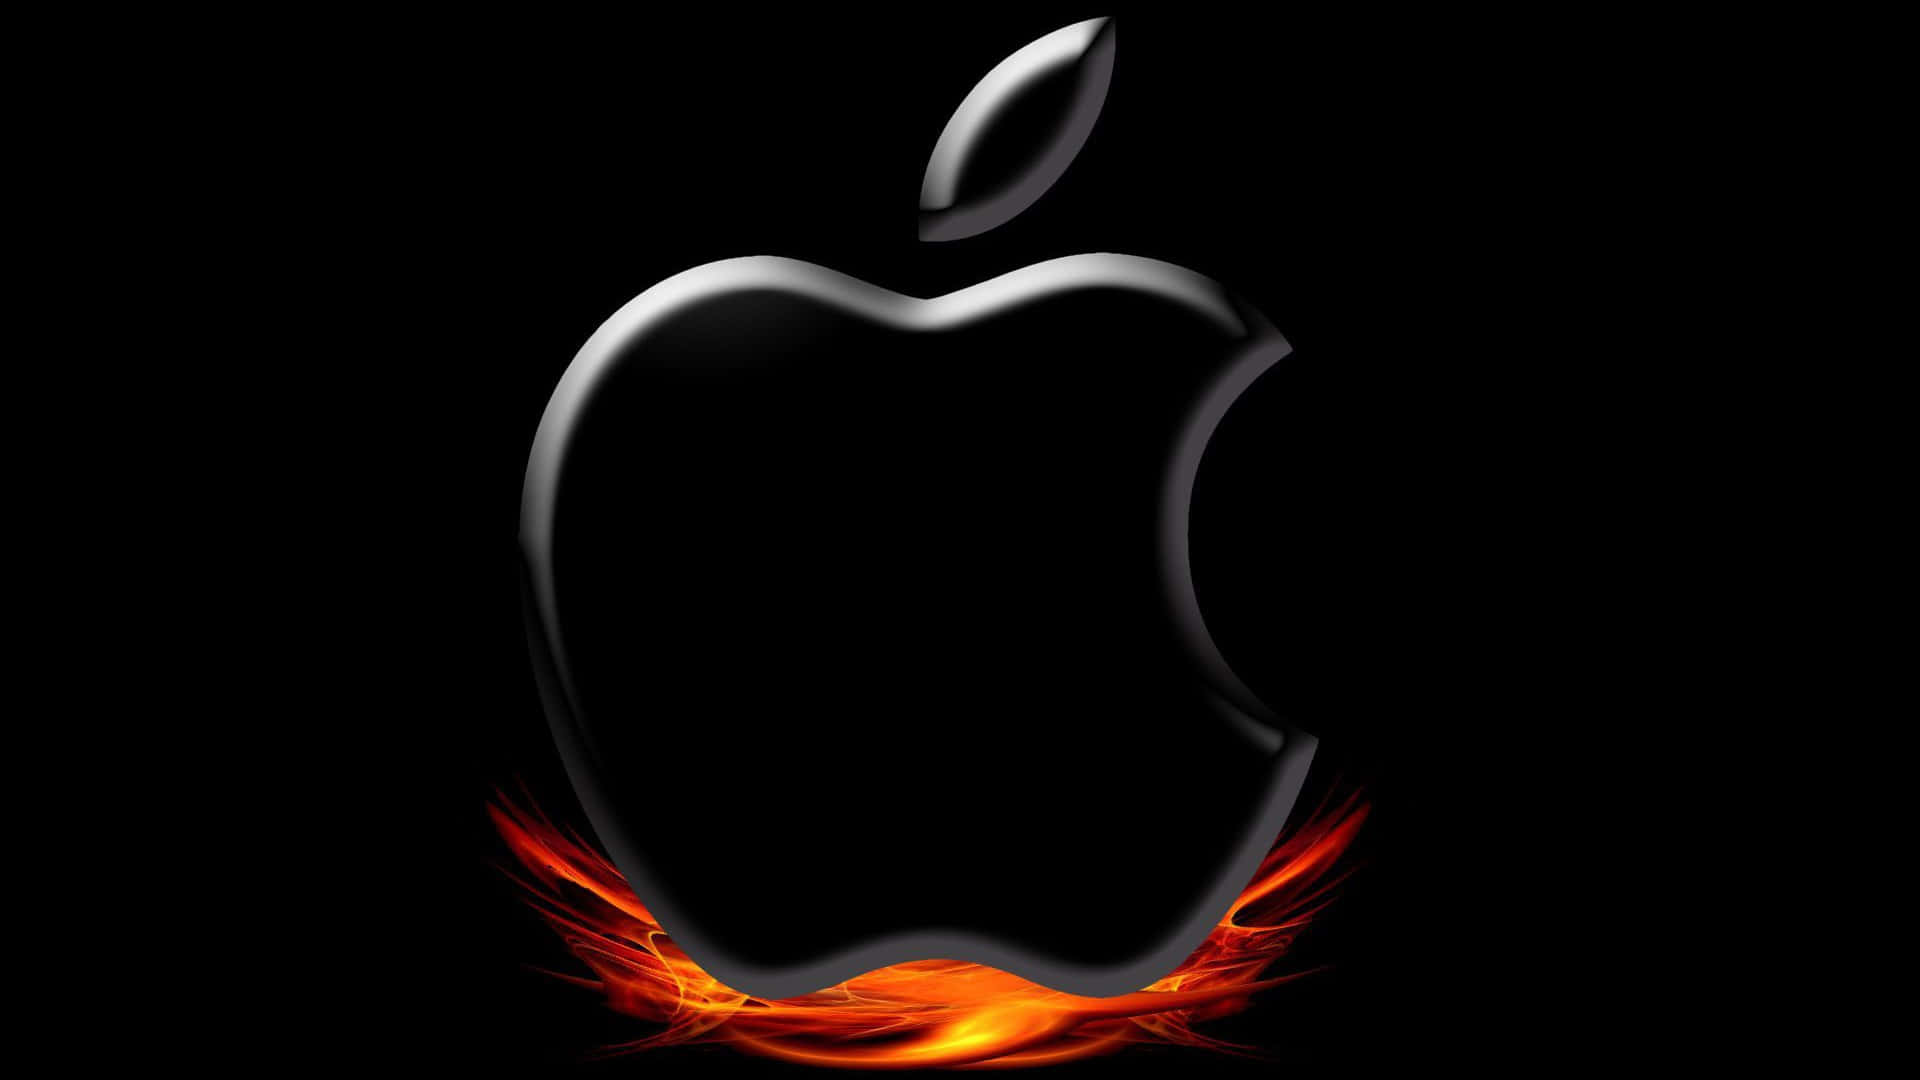 Apple Logo In Flames On A Black Background Wallpaper